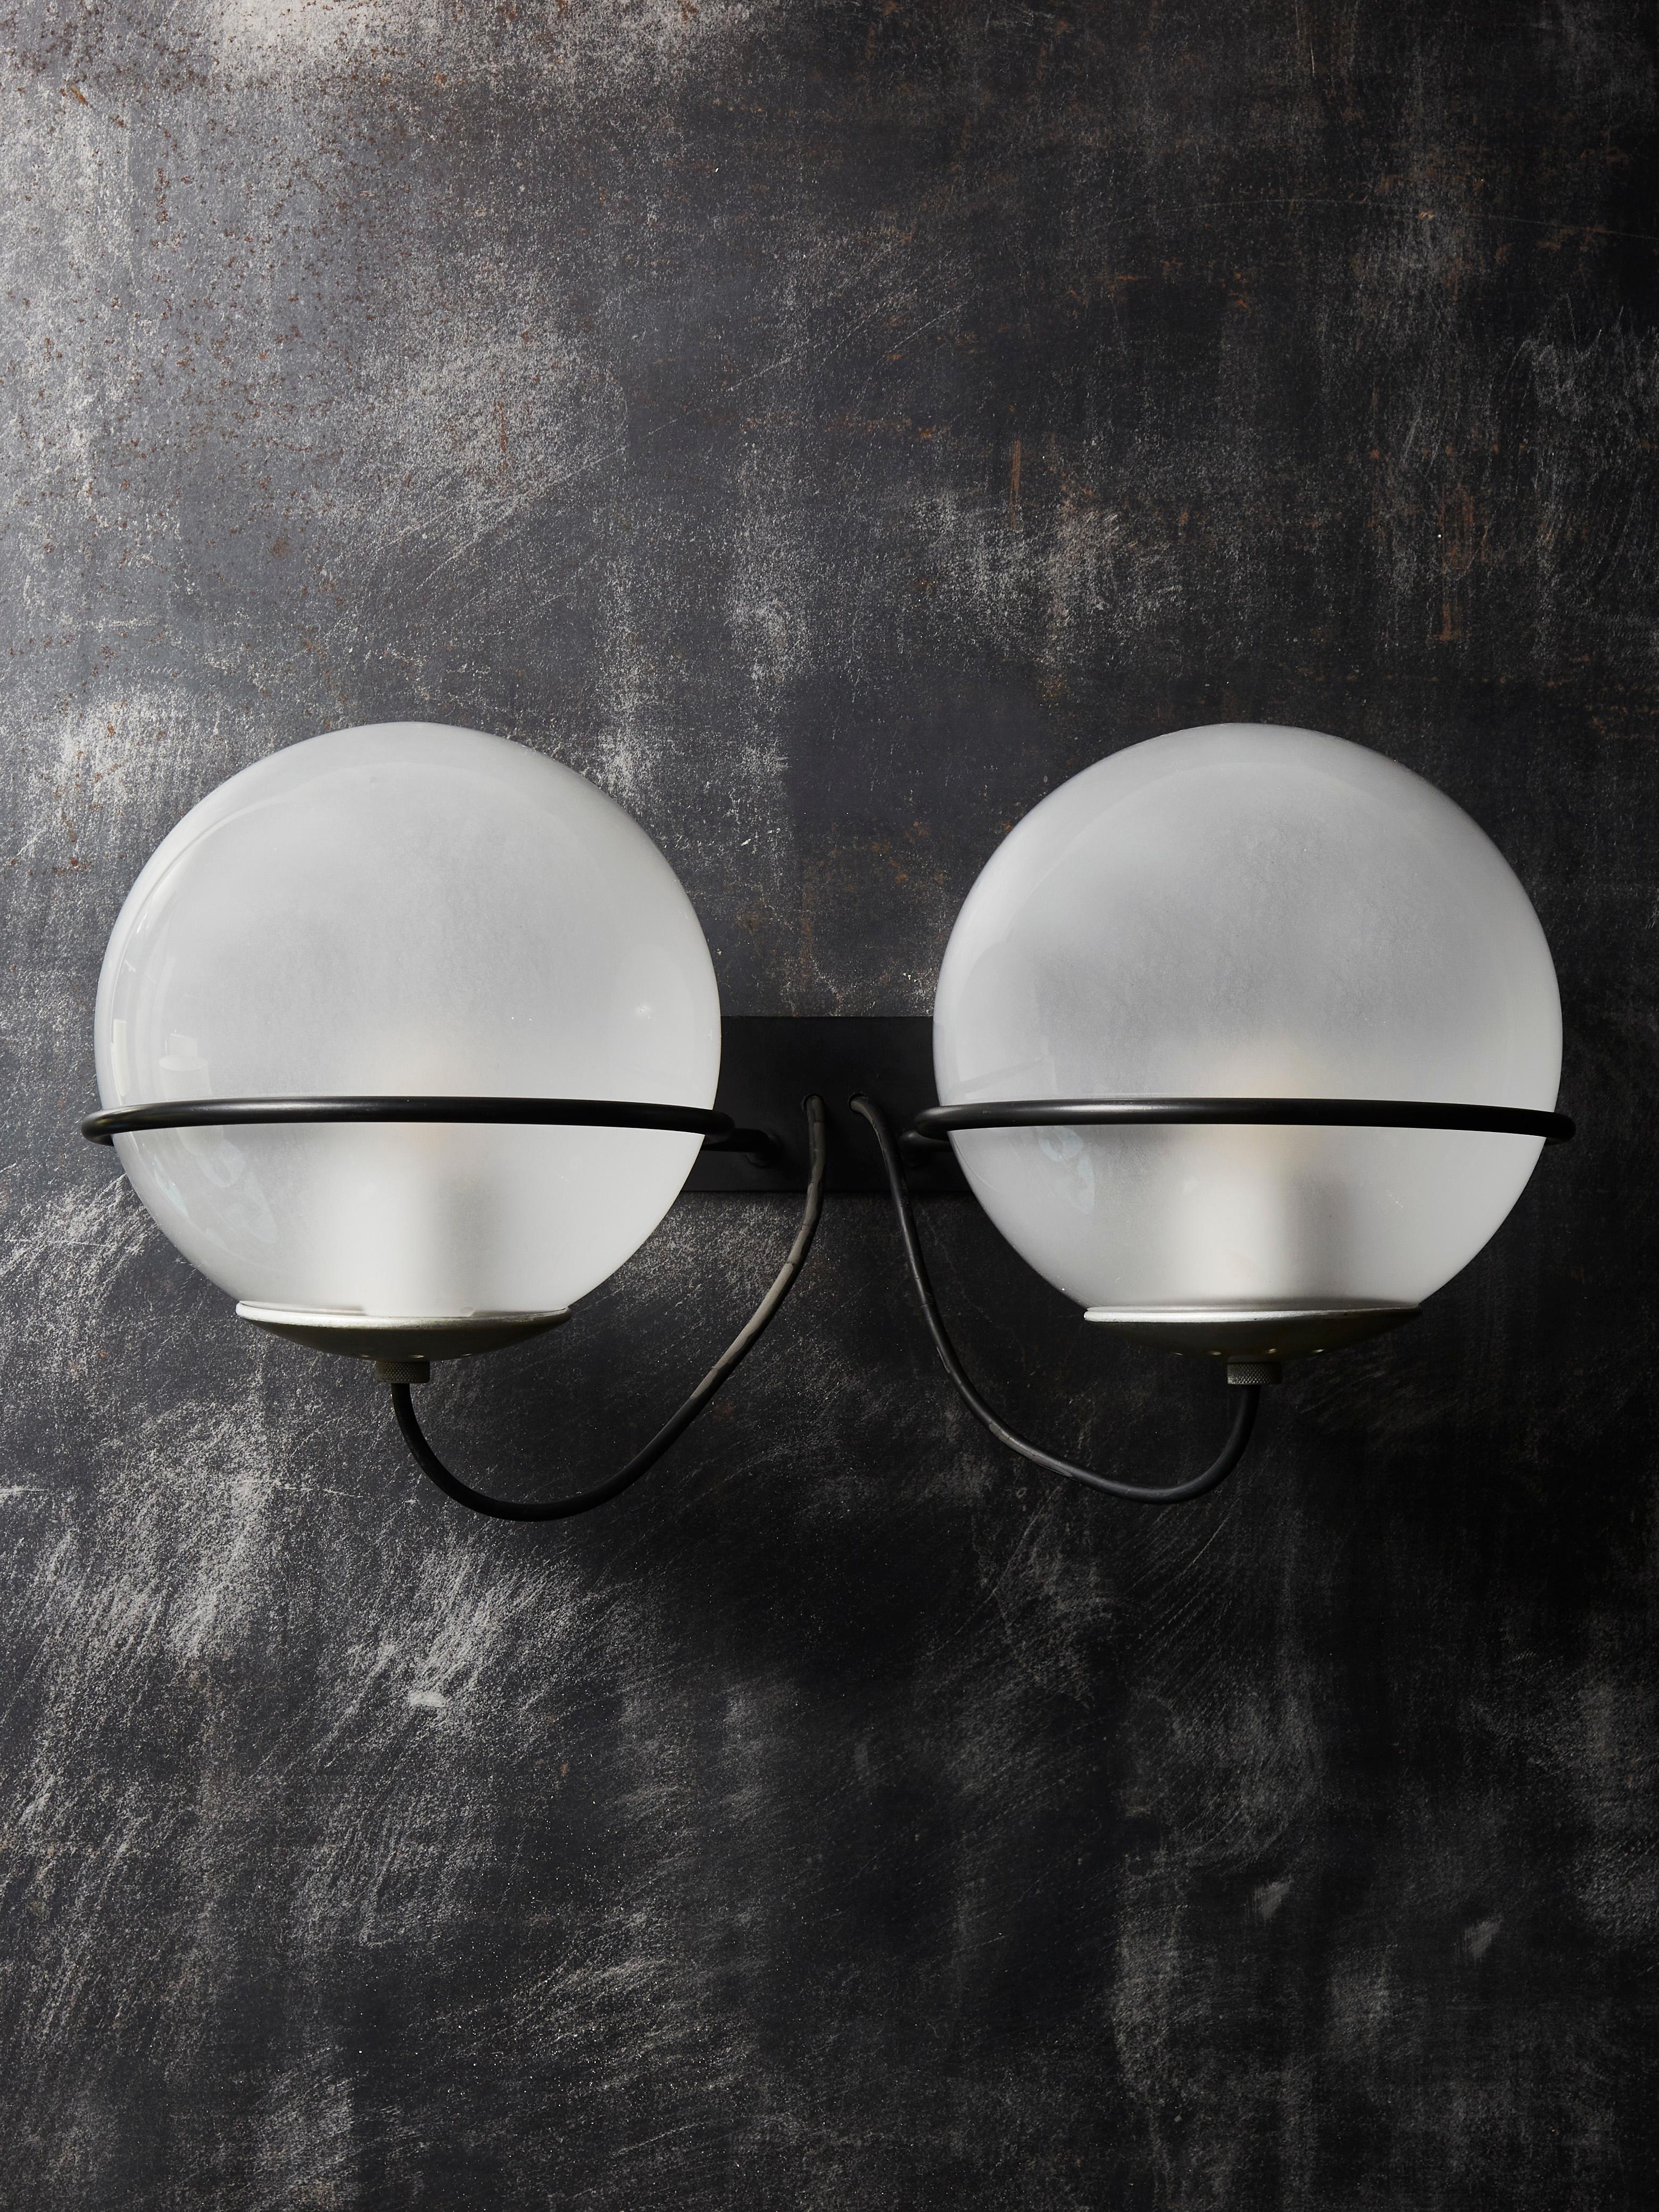 Original pair of vintage model 237/2 wall sconces by Gino Sarfatti for Arteluce.

Two frosted glass globes resting on the black lacquered iron bar support rings. Closed with oxidized aluminium plate.

Original sticker on the backplate.
 